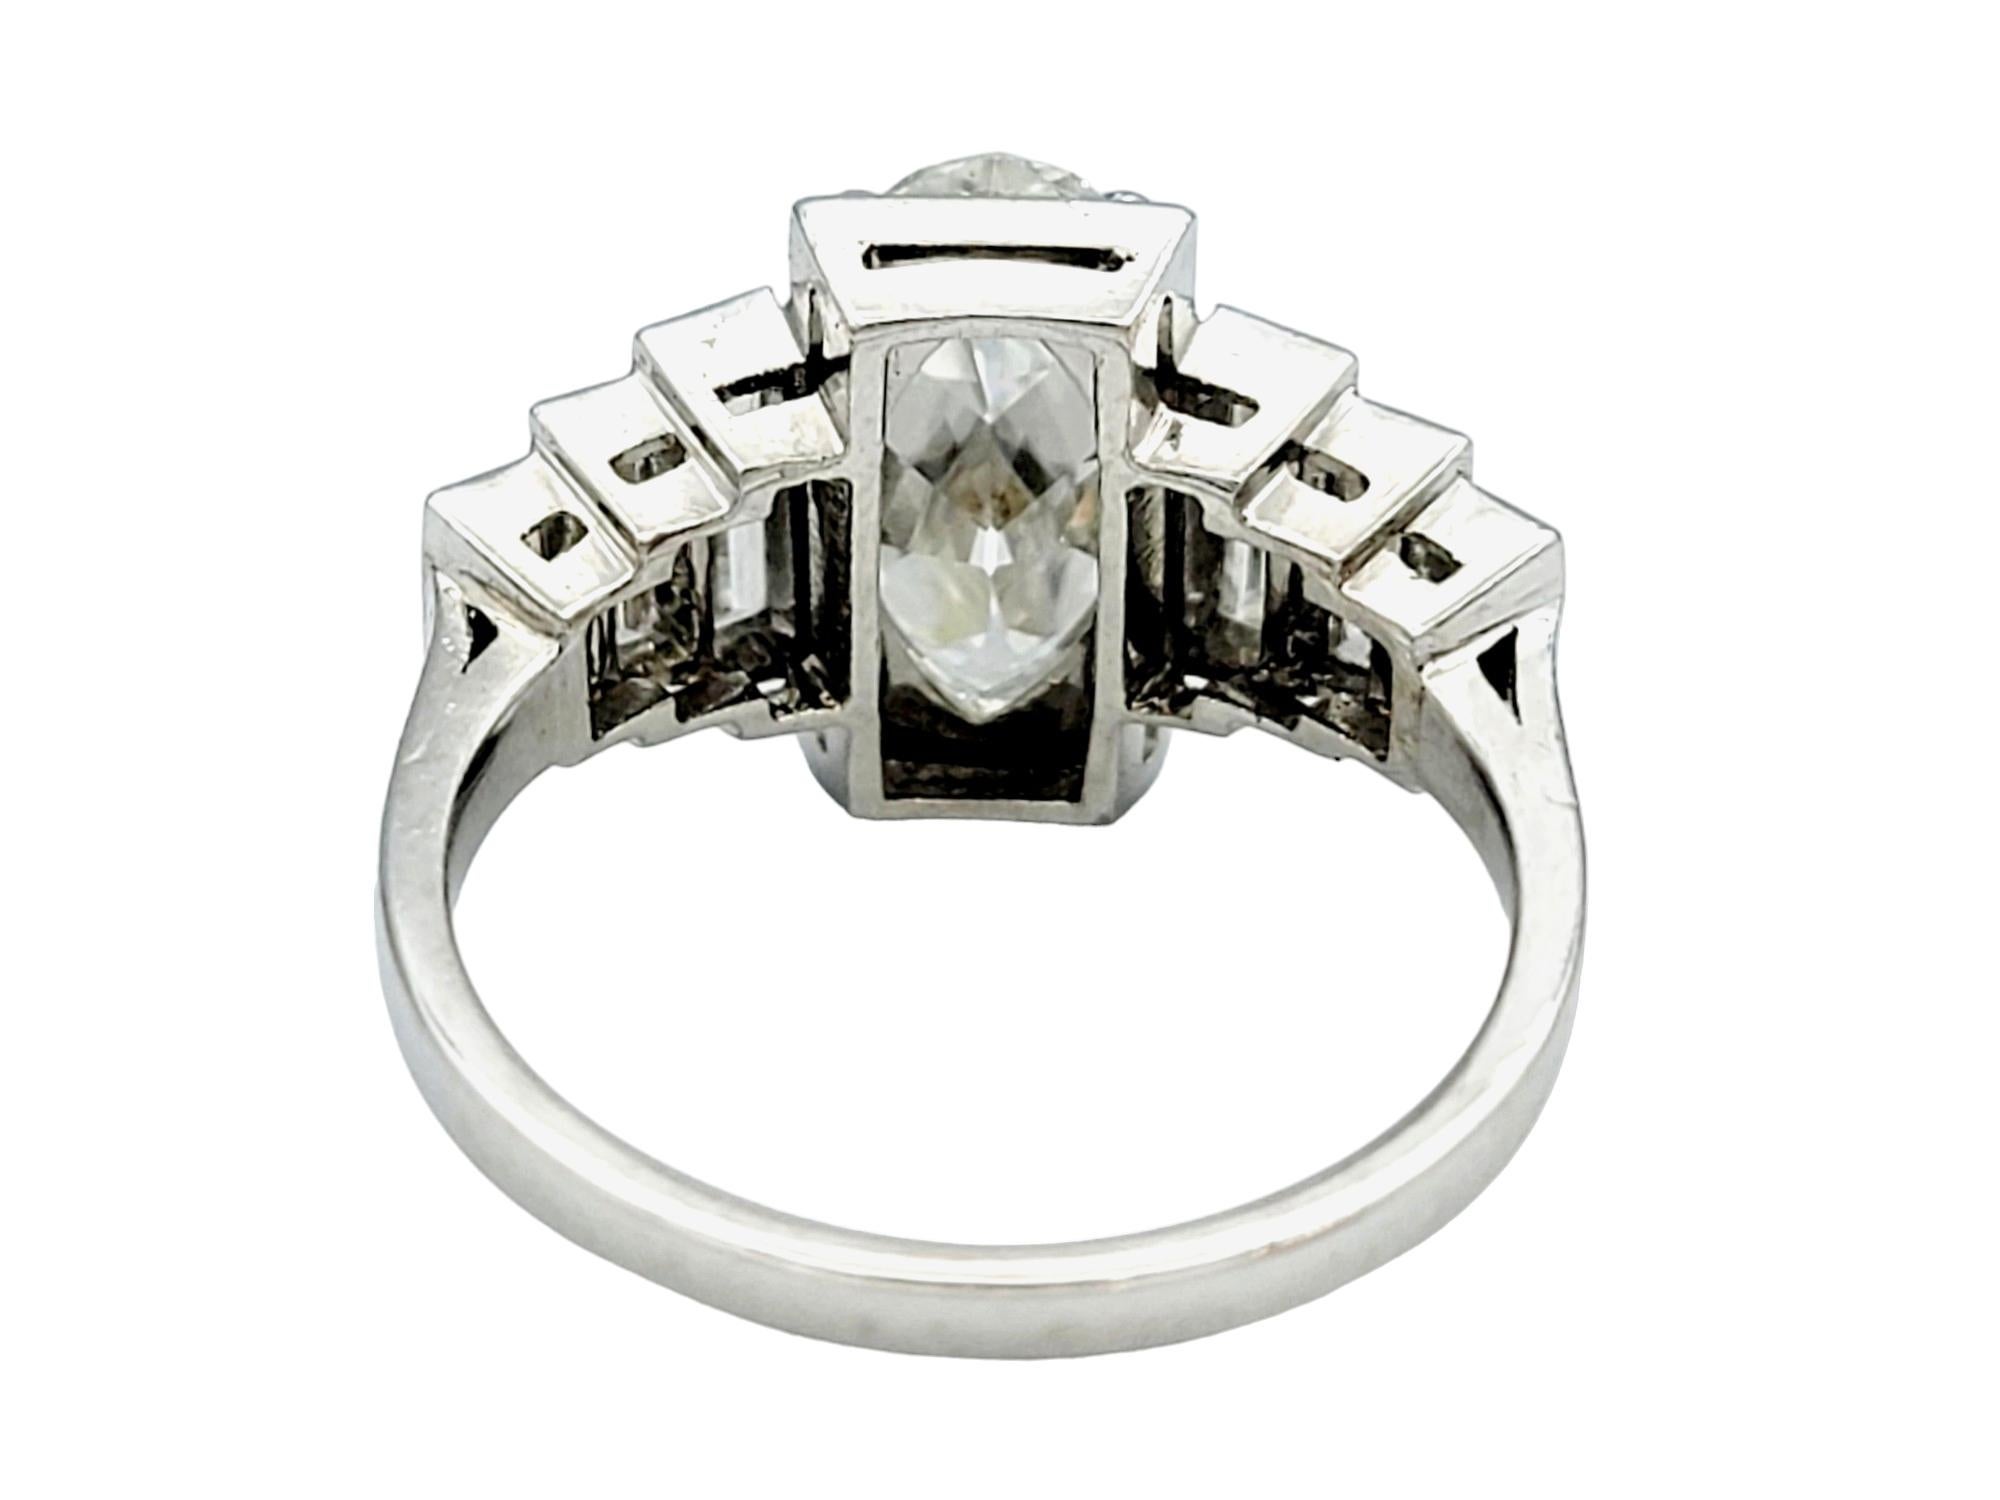 3.16 Carat Total Art Deco Marquise and Tapered Baguette Diamond Ring in Platinum In Good Condition For Sale In Scottsdale, AZ